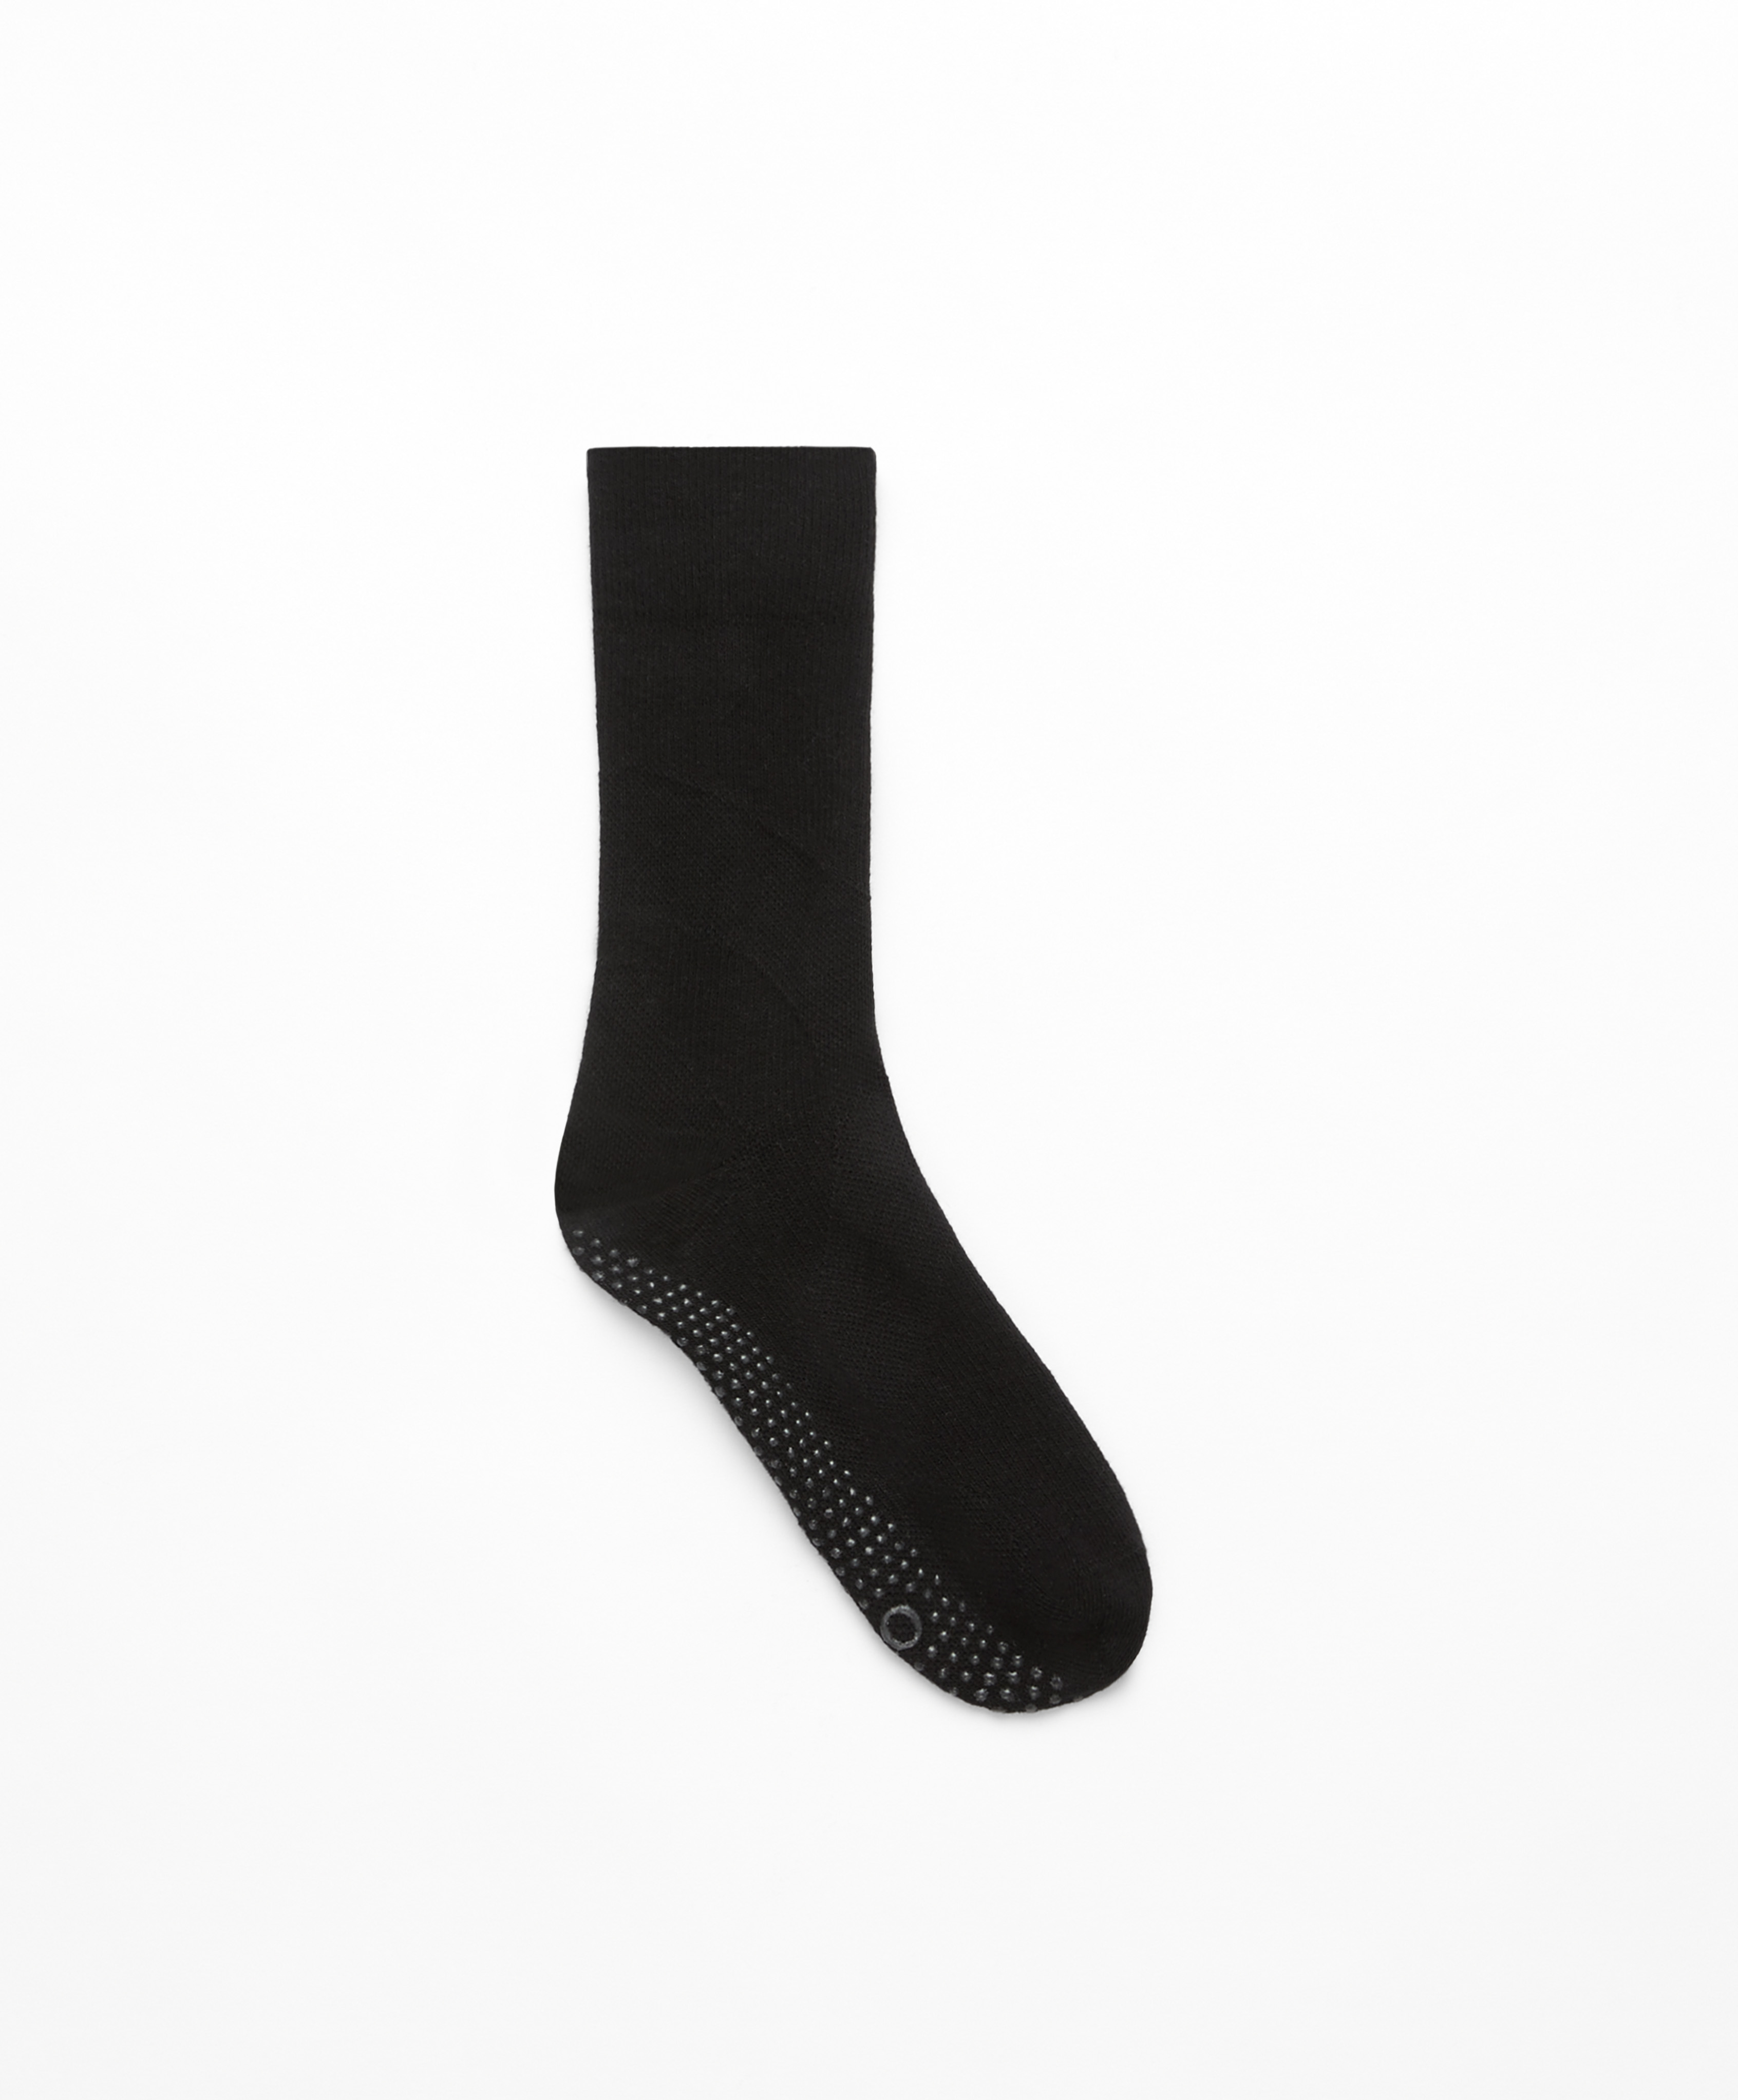 Cotton classic socks for yoga and Pilates